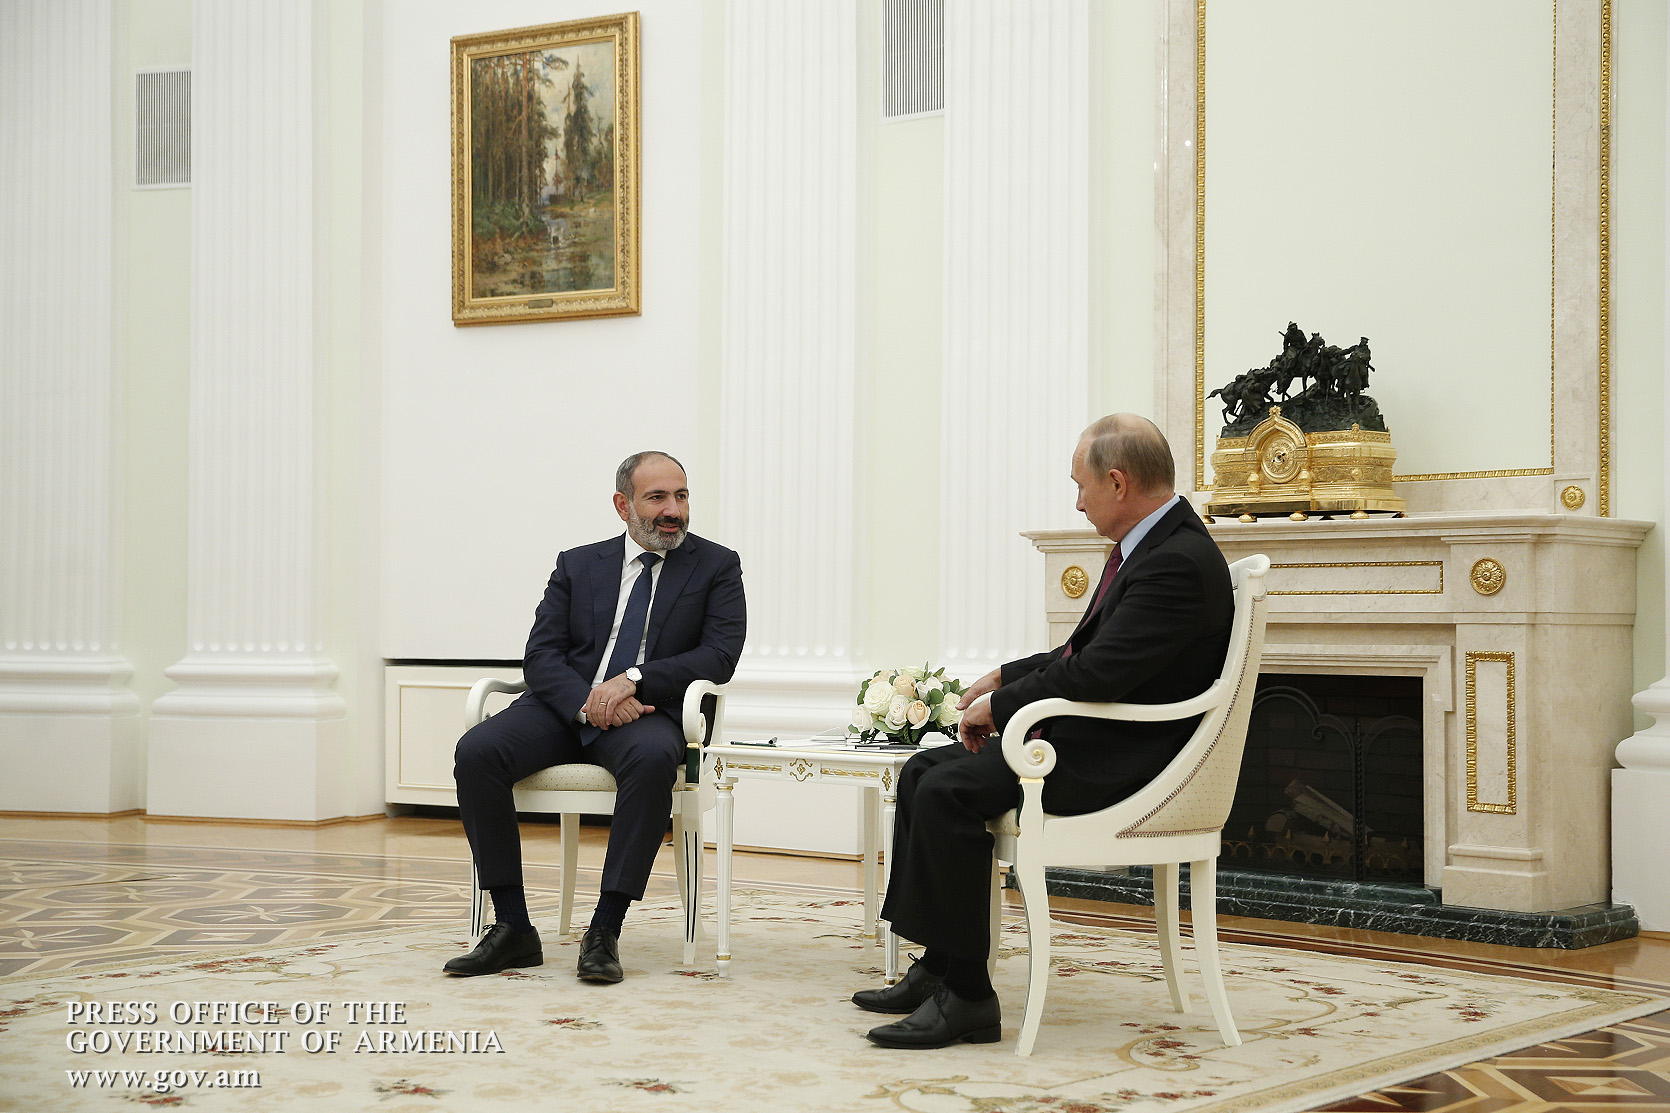 Only Russia had similar committee in Eurasian Economic Union, now Armenia will too